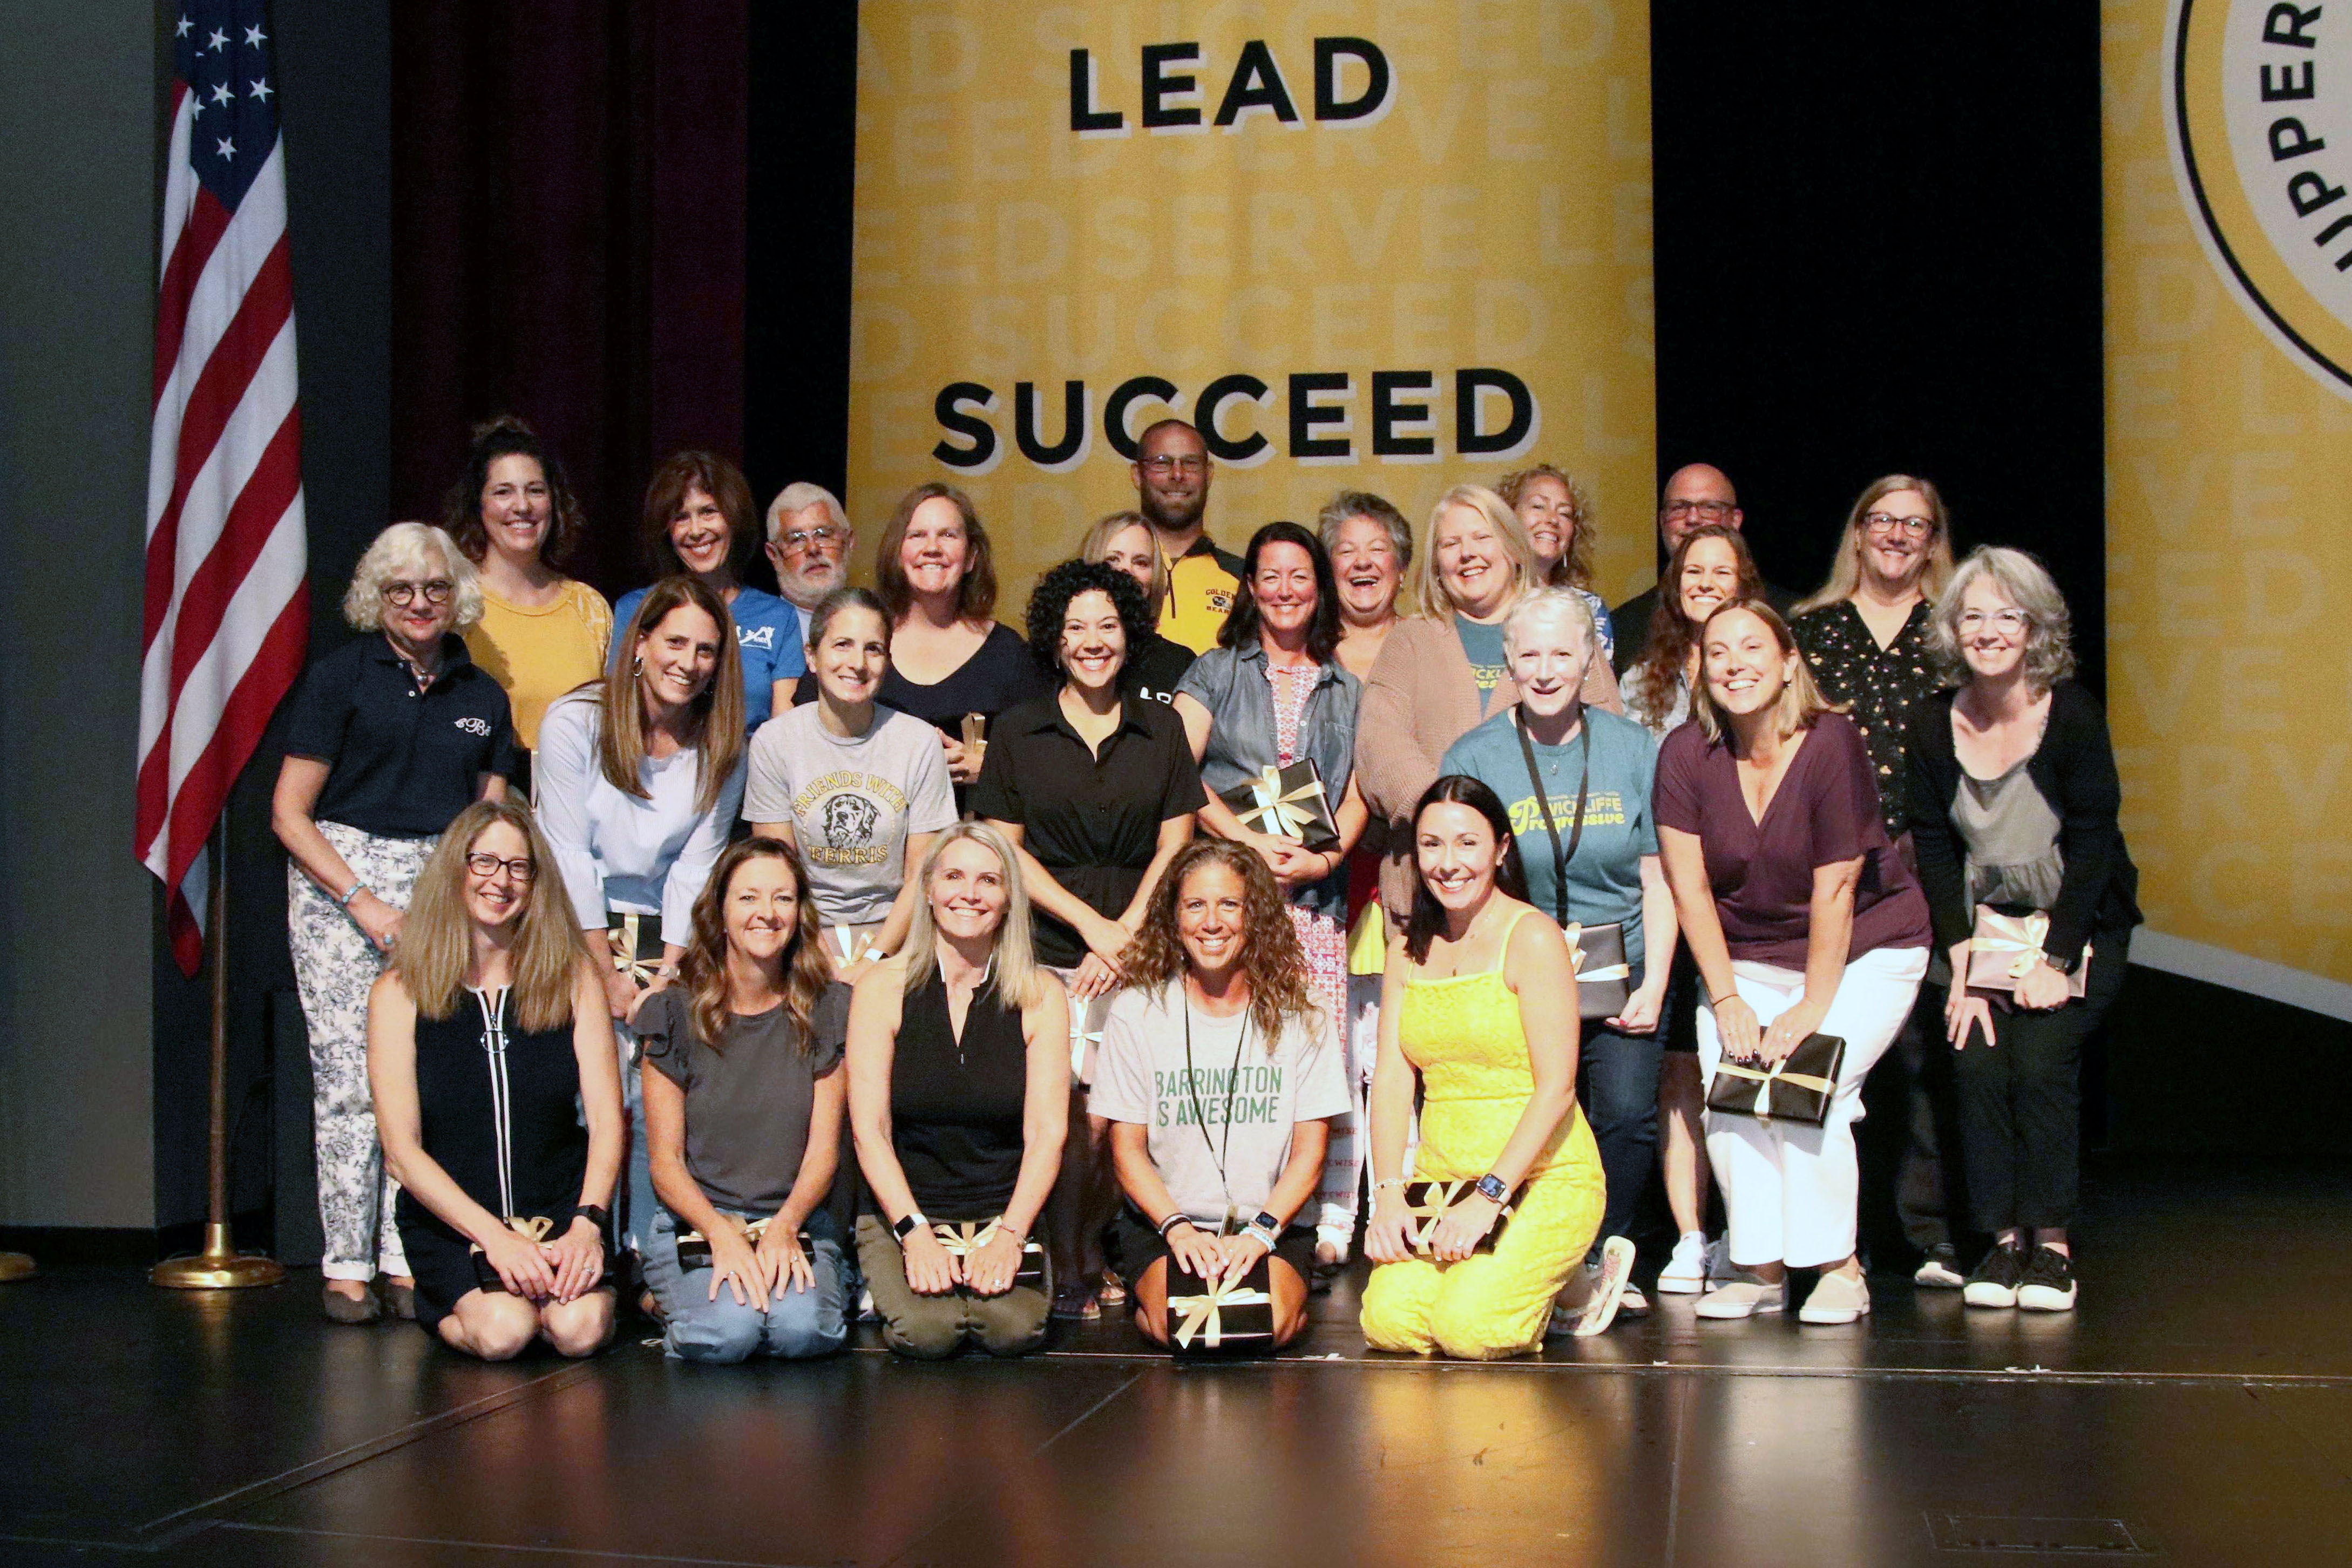 A large group of staff members celebrating 20 years of service with the Upper Arlington Schools posing for a photo on stage with an American flag to the left and gold banners in the background